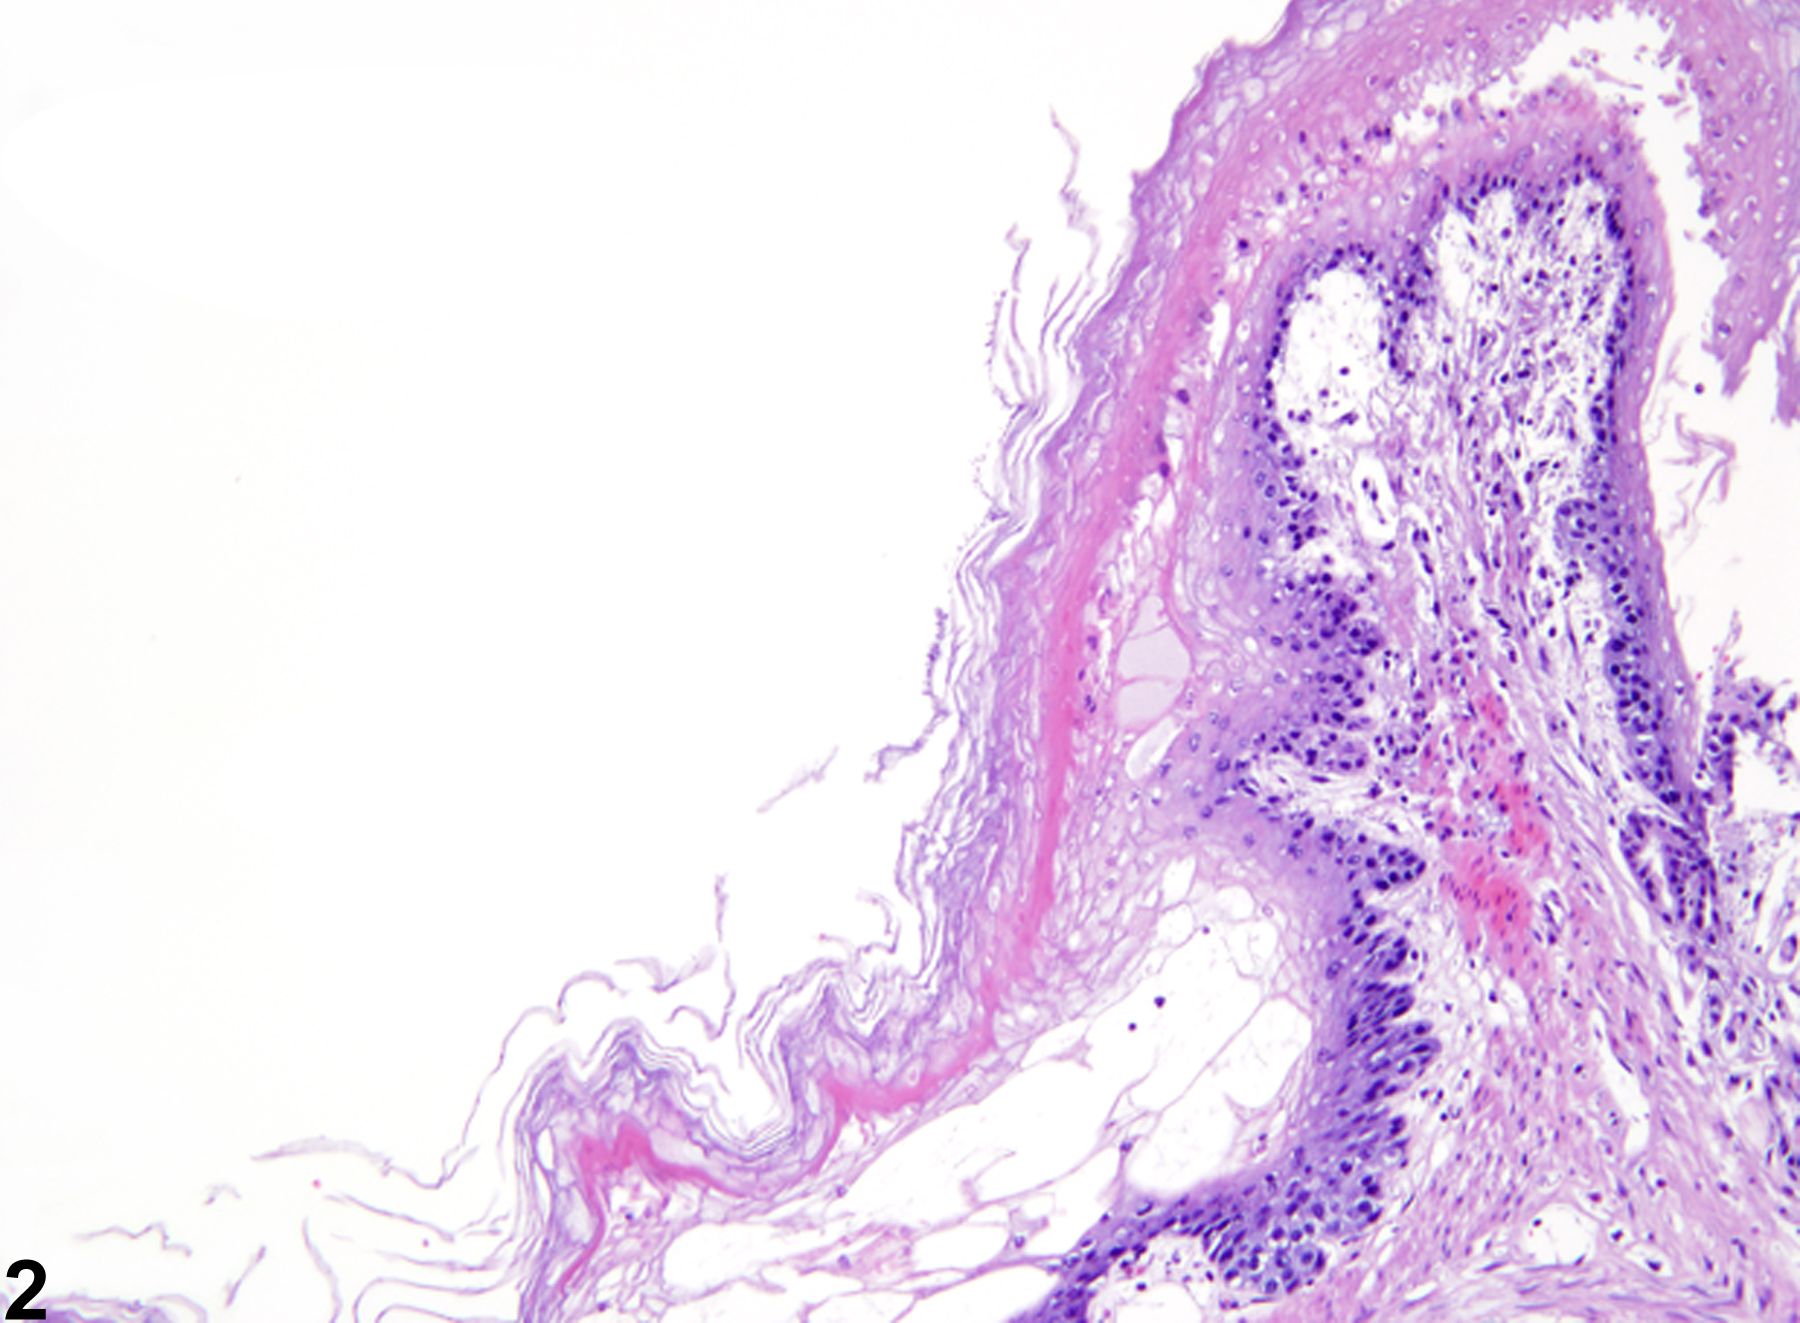 Image of degeneration in the forestomach epithelium from a female F344/N rat in a subchronic study